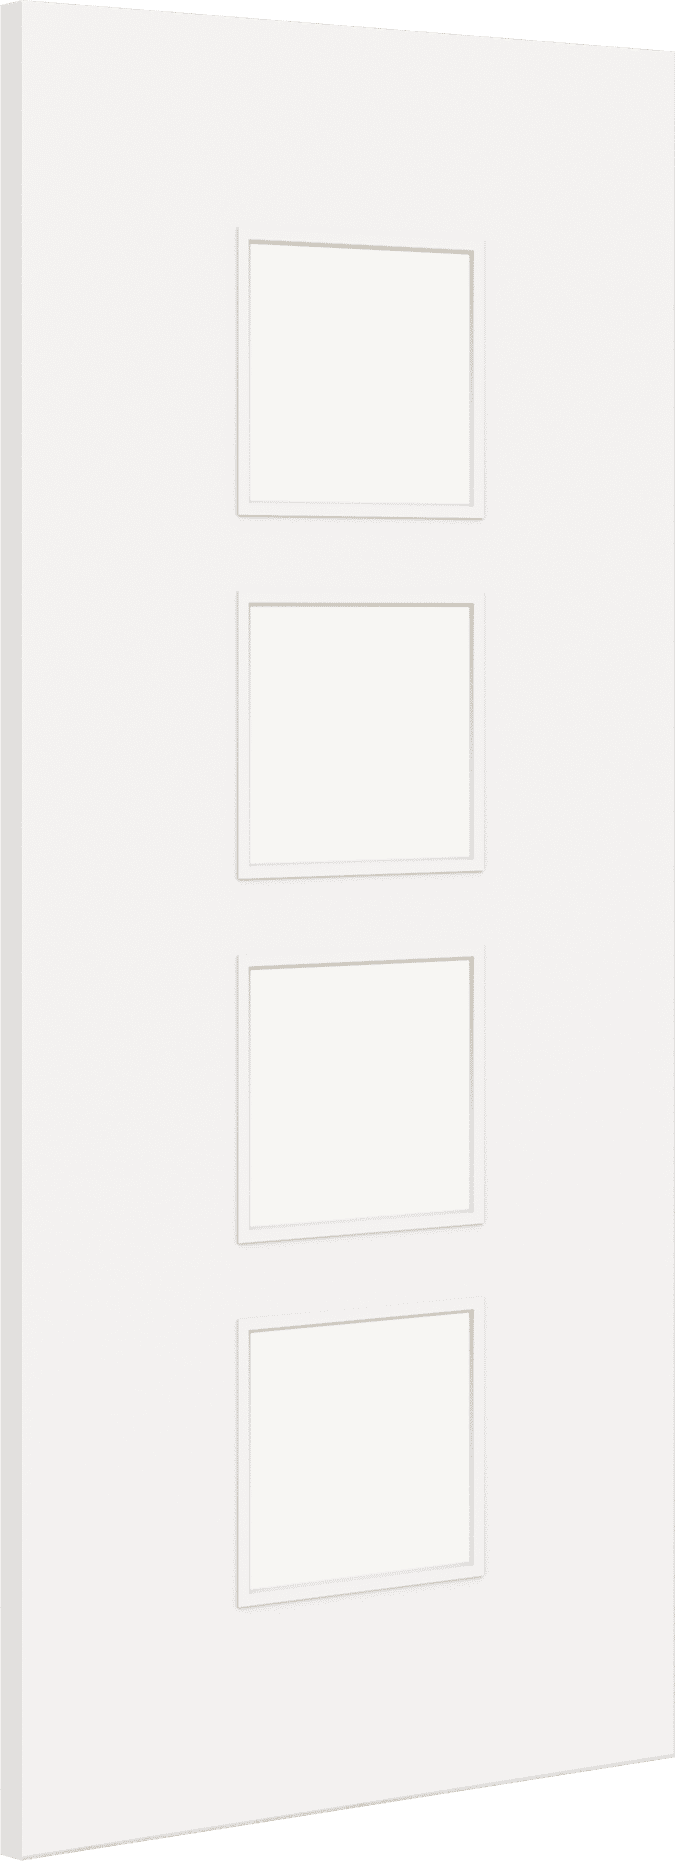 2040mm x 826mm x 44mm Architectural Paint Grade White 09 Clear Glazed Fire Door Blank